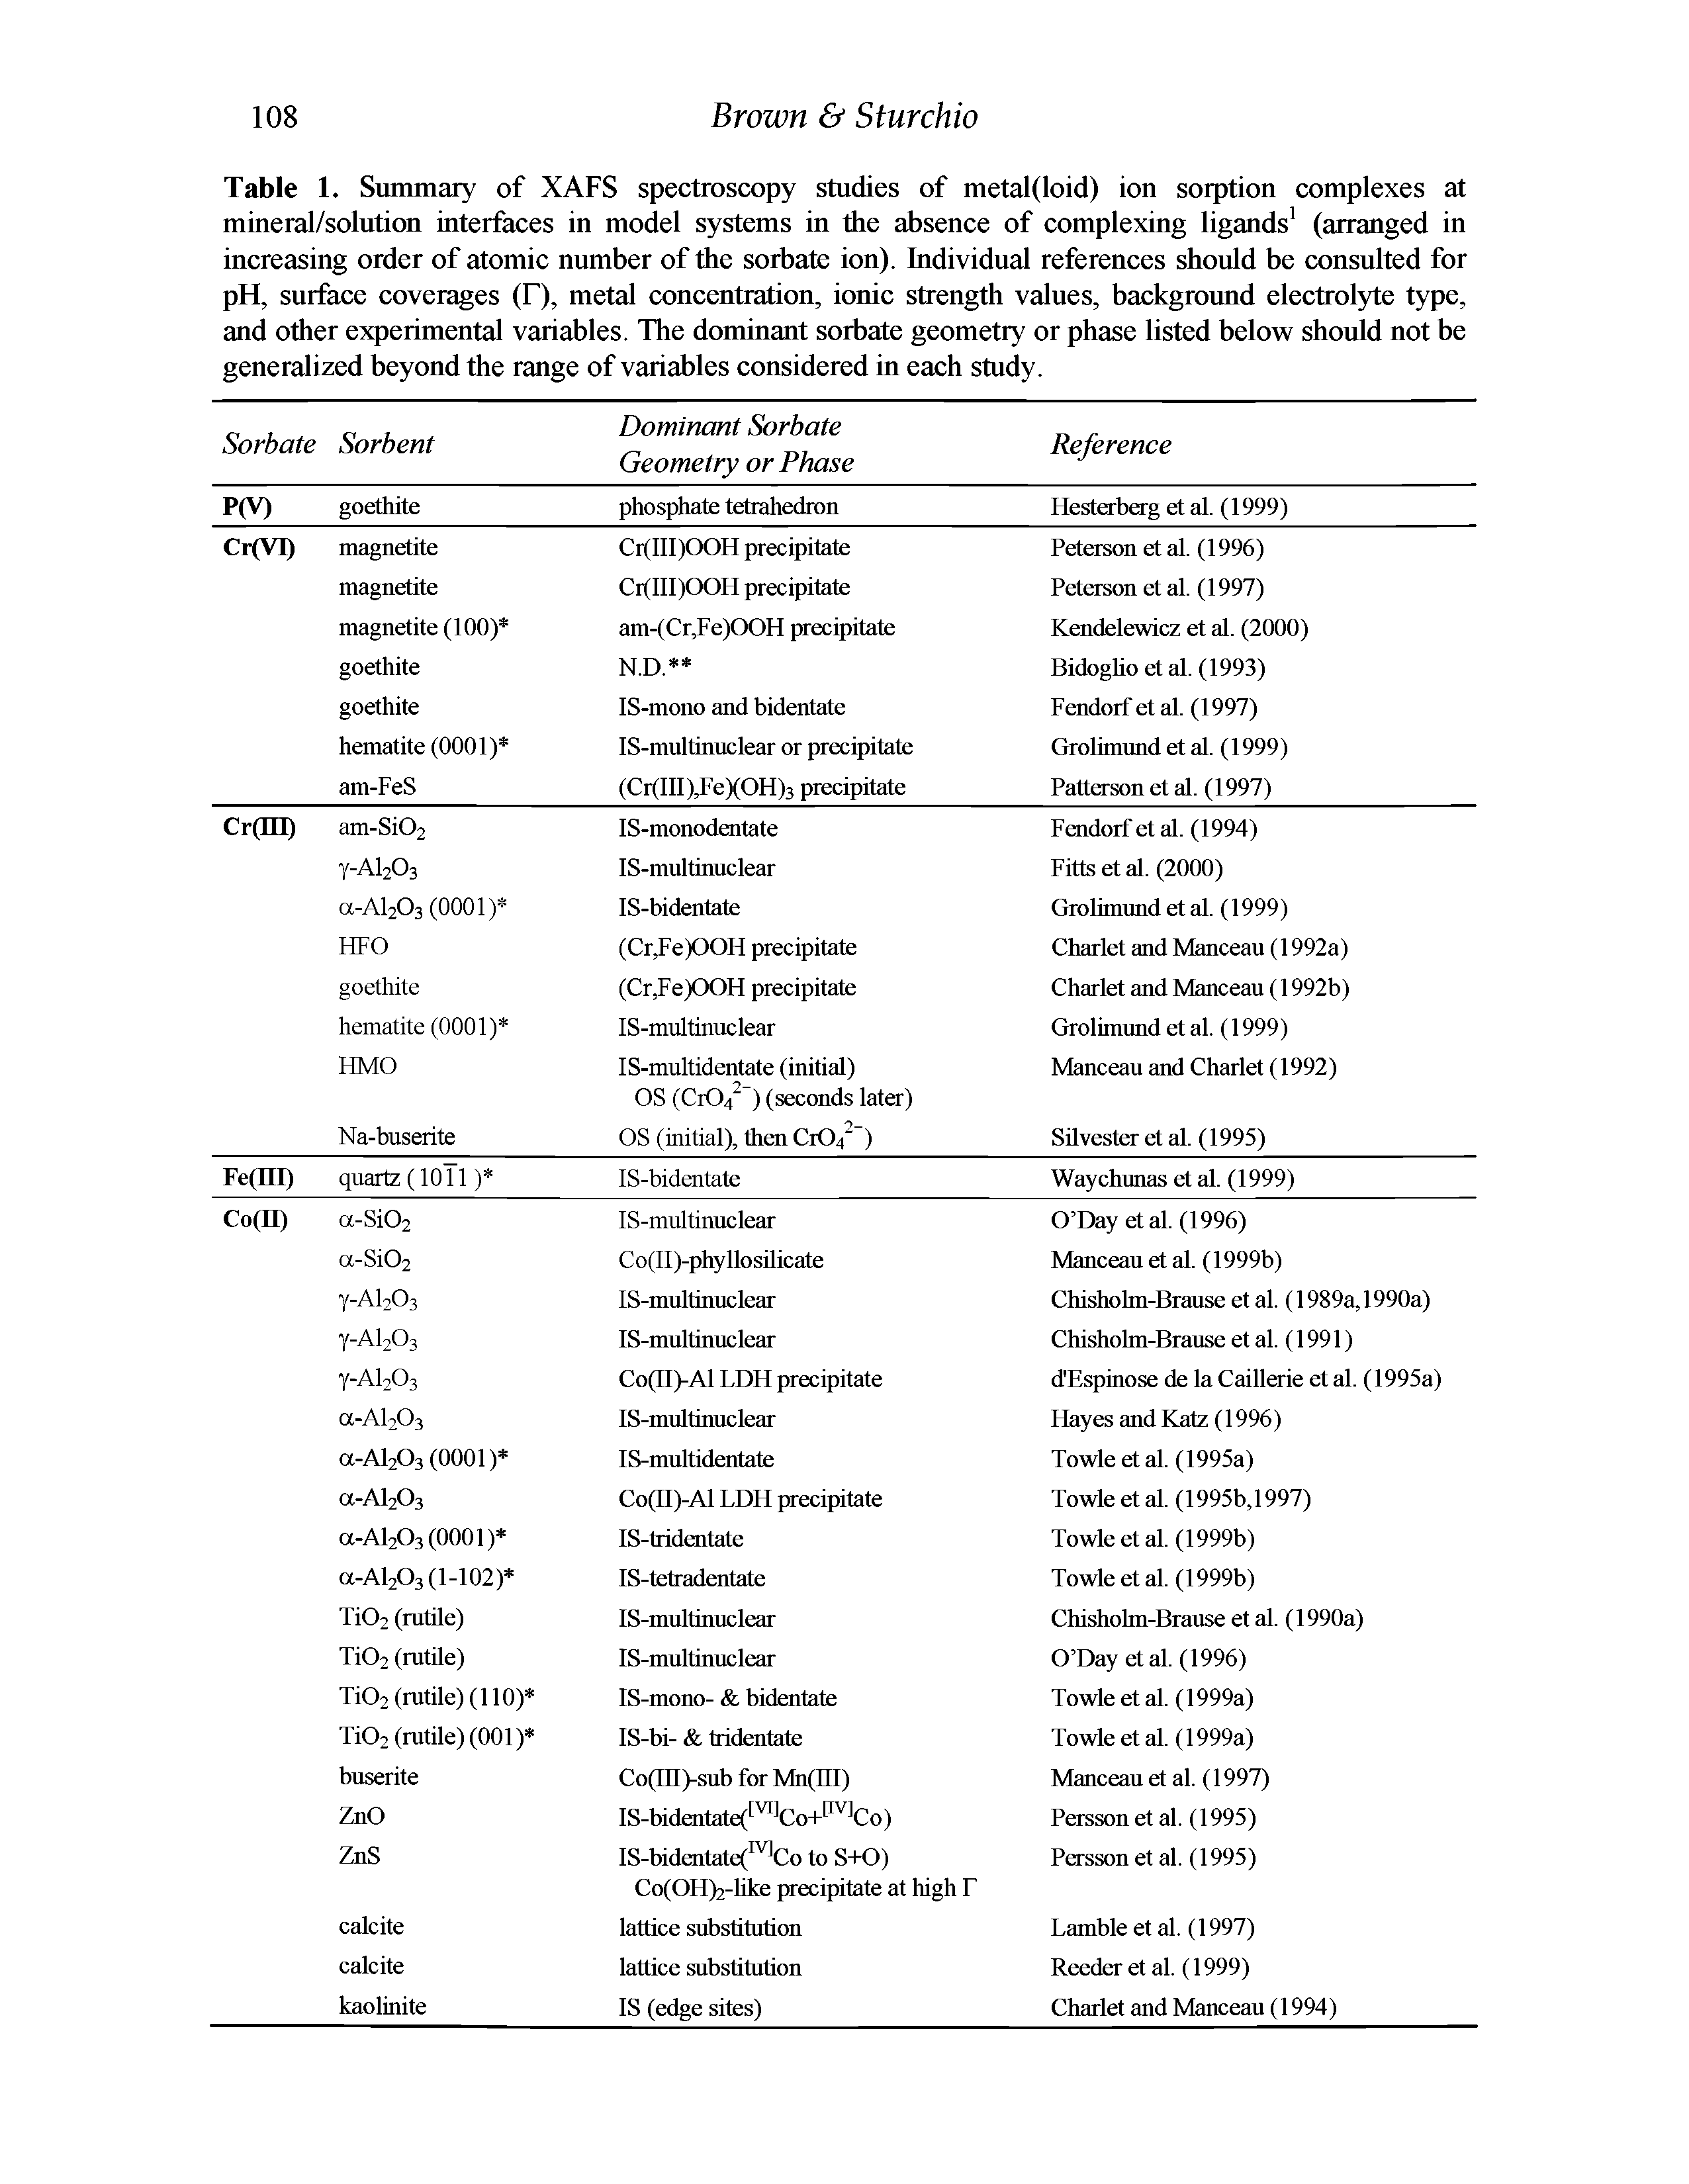 Table 1. Summary of XAFS spectroscopy studies of metal(loid) ion sorption complexes at mineral/solution interfaces in model systems in the absence of complexing ligands1 (arranged in increasing order of atomic number of the sorbate ion). Individual references should be consulted for pH, surface coverages ( ), metal concentration, ionic strength values, background electrolyte type, and other experimental variables. The dominant sorbate geometry or phase listed below should not be generalized beyond the range of variables considered in each study.